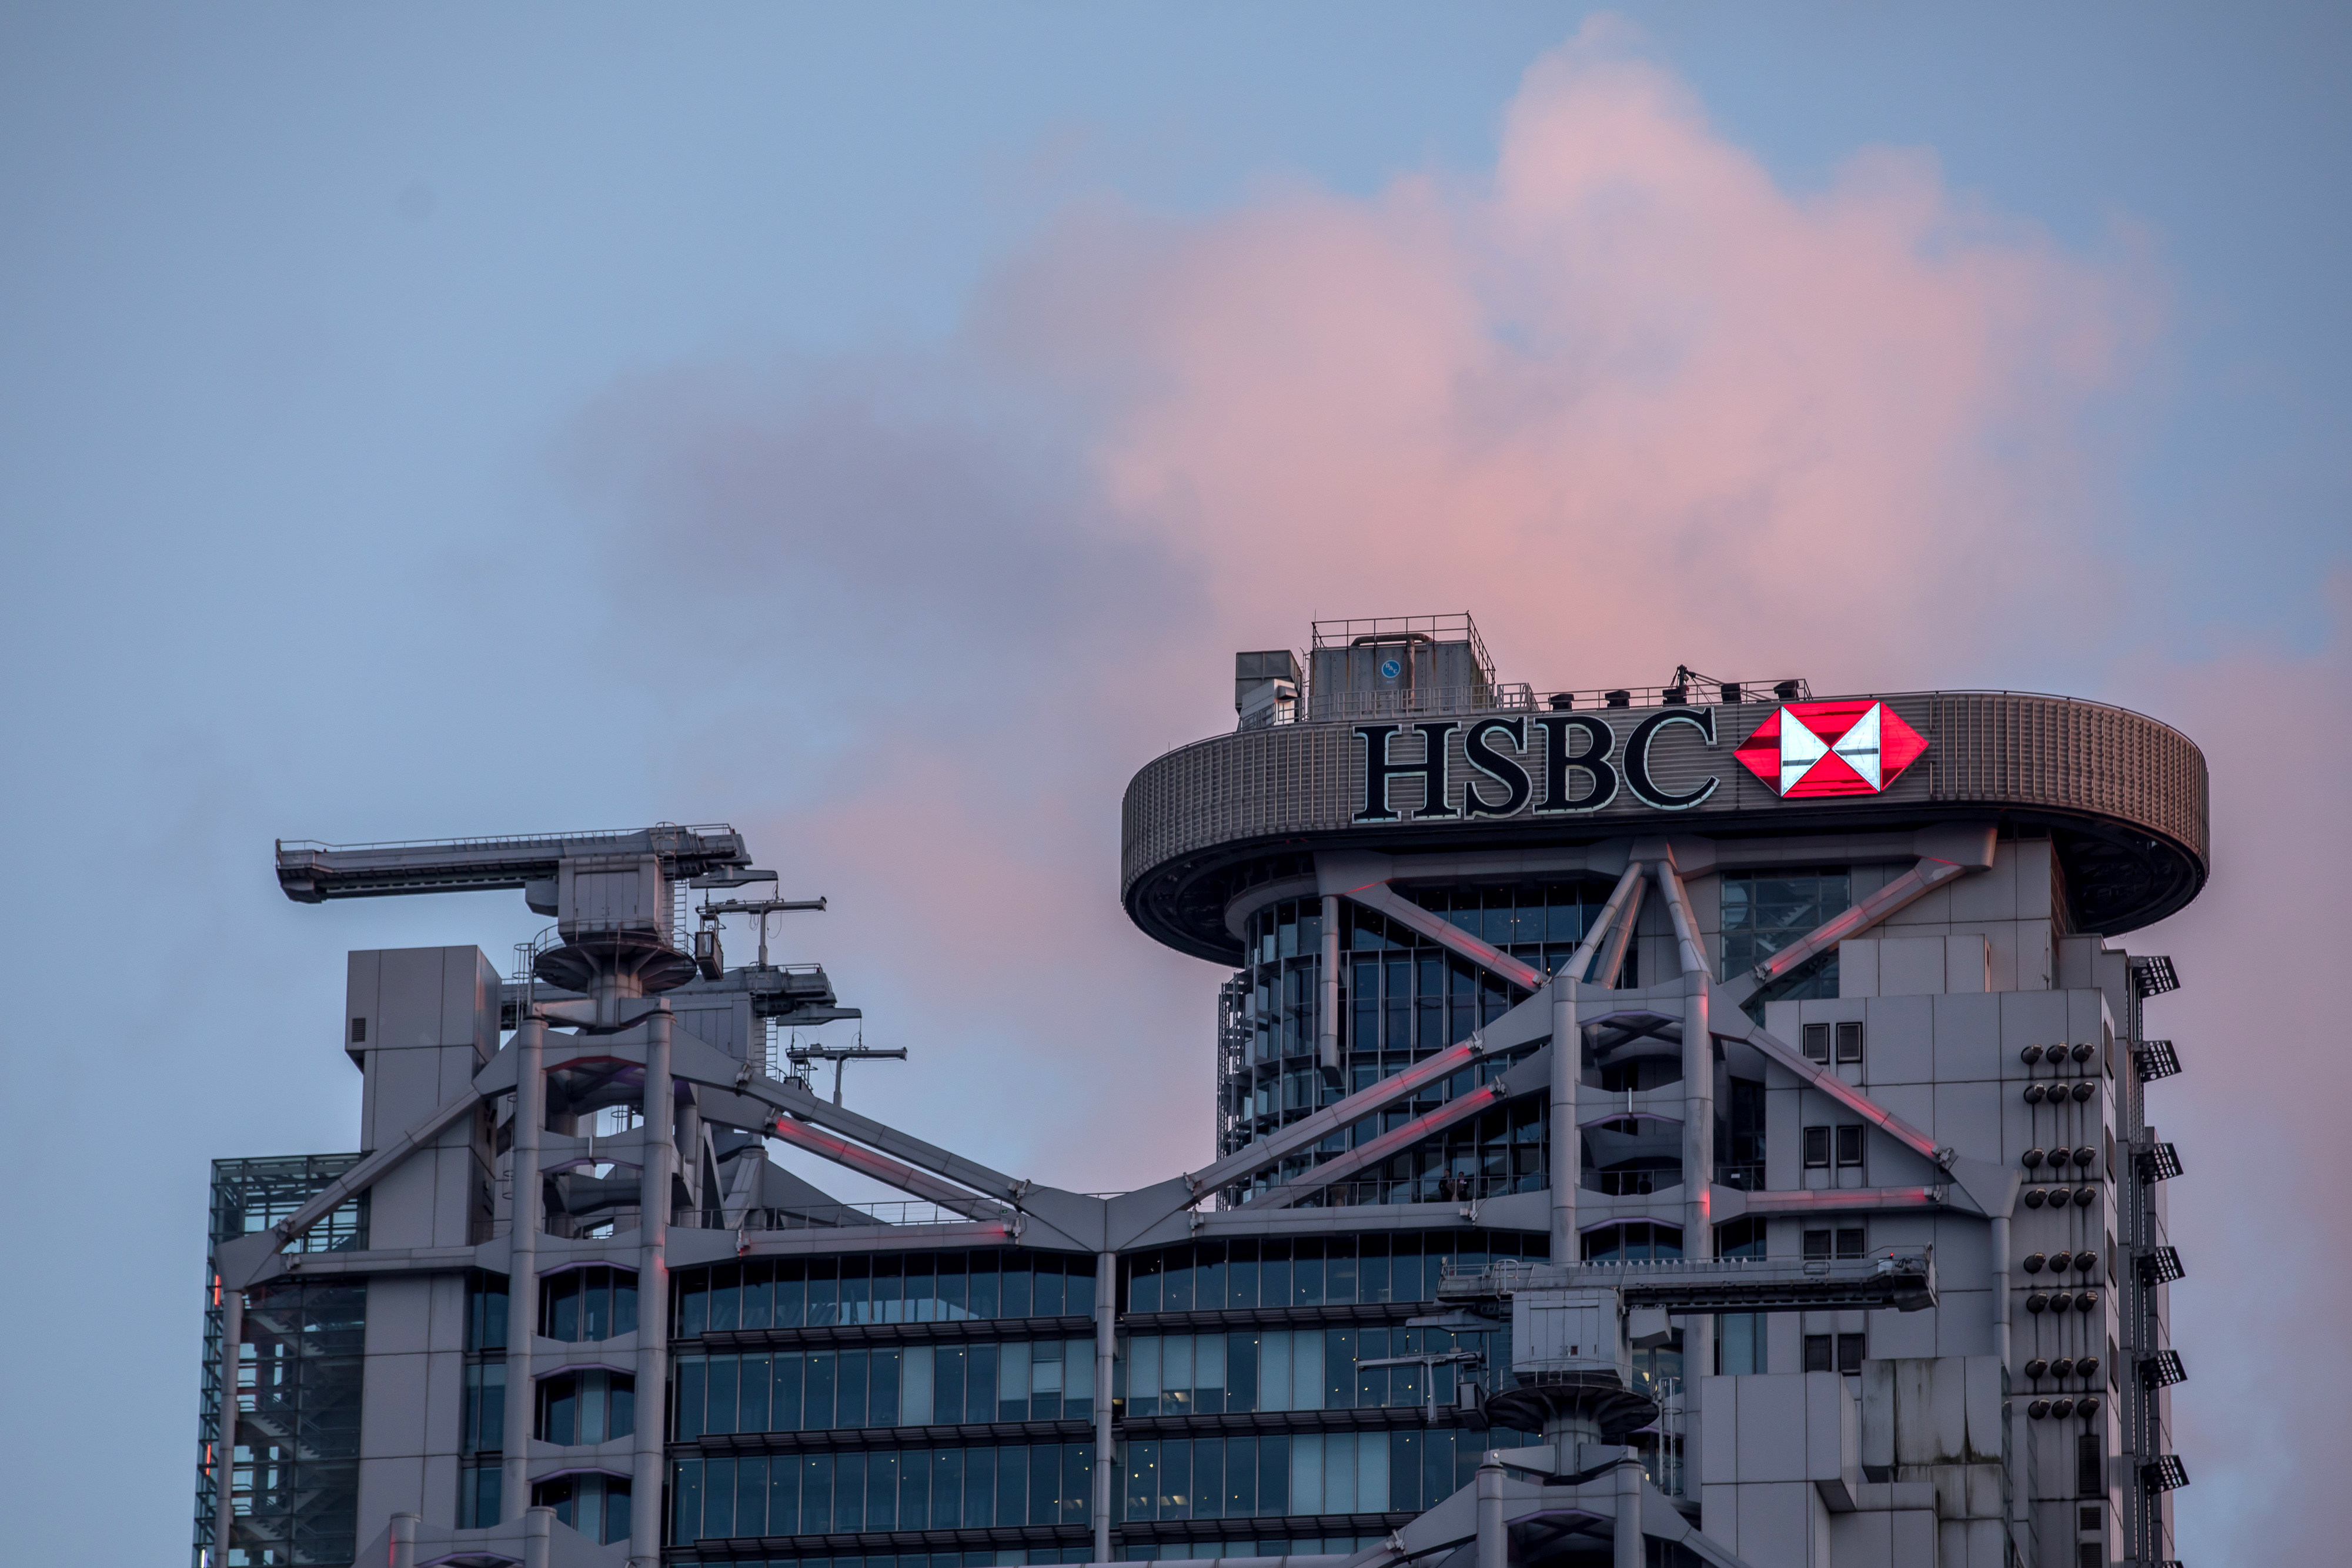 Banks such as HSBC have rolled out initiatives to reduce financing to carbon-intensive sectors as part of efforts to slash their carbon dioxide emissions and reach net zero within three decades. Photo: Bloomberg